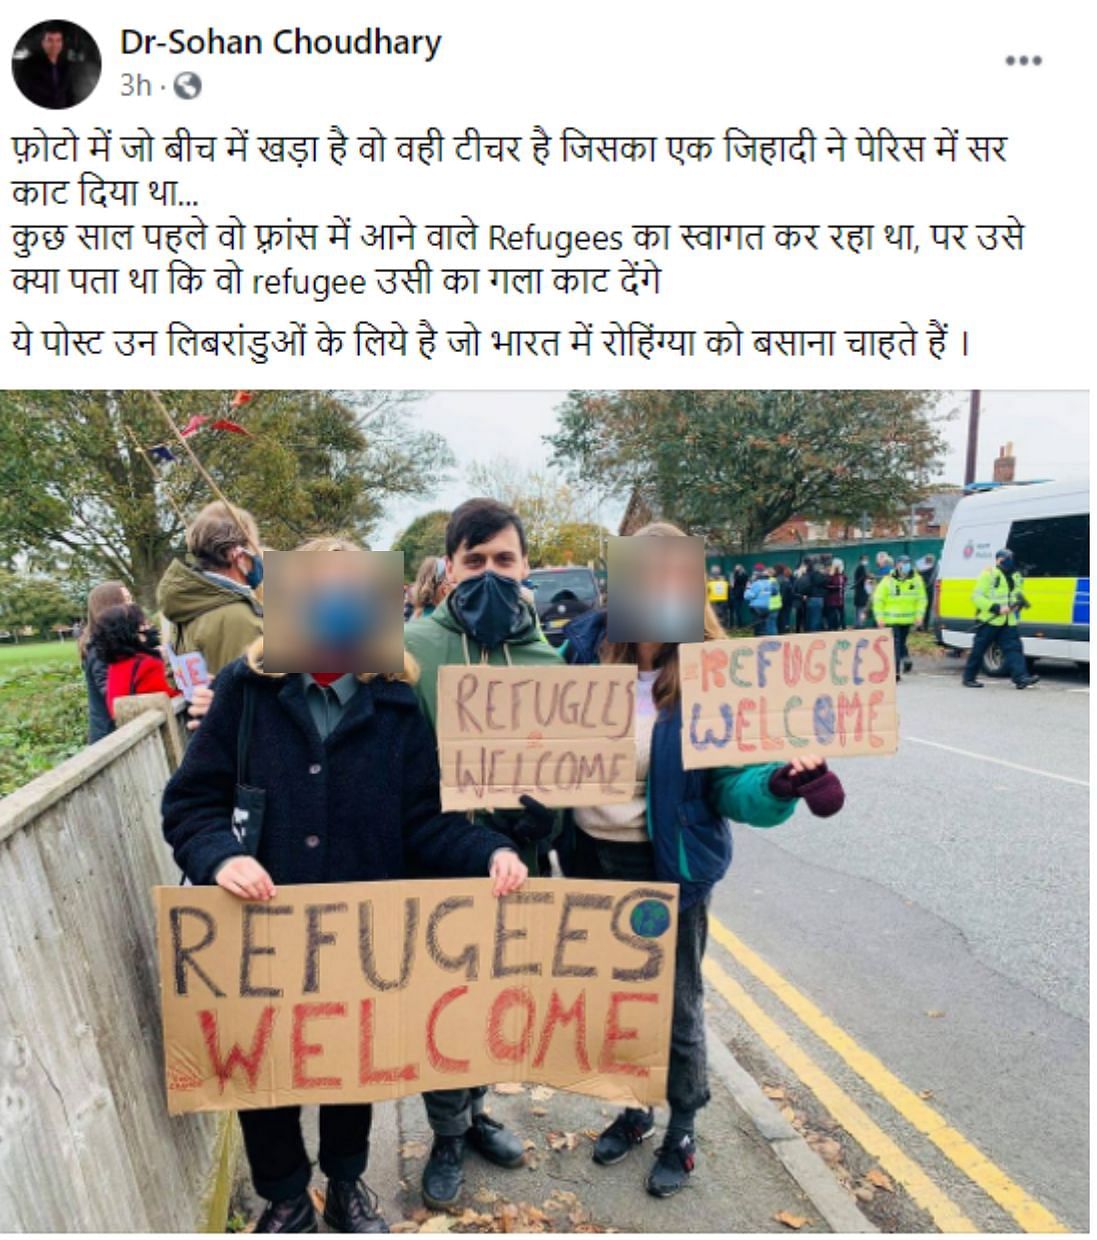 The image is unrelated to the victim in Paris and shows an event welcoming refugees in Kent, England.